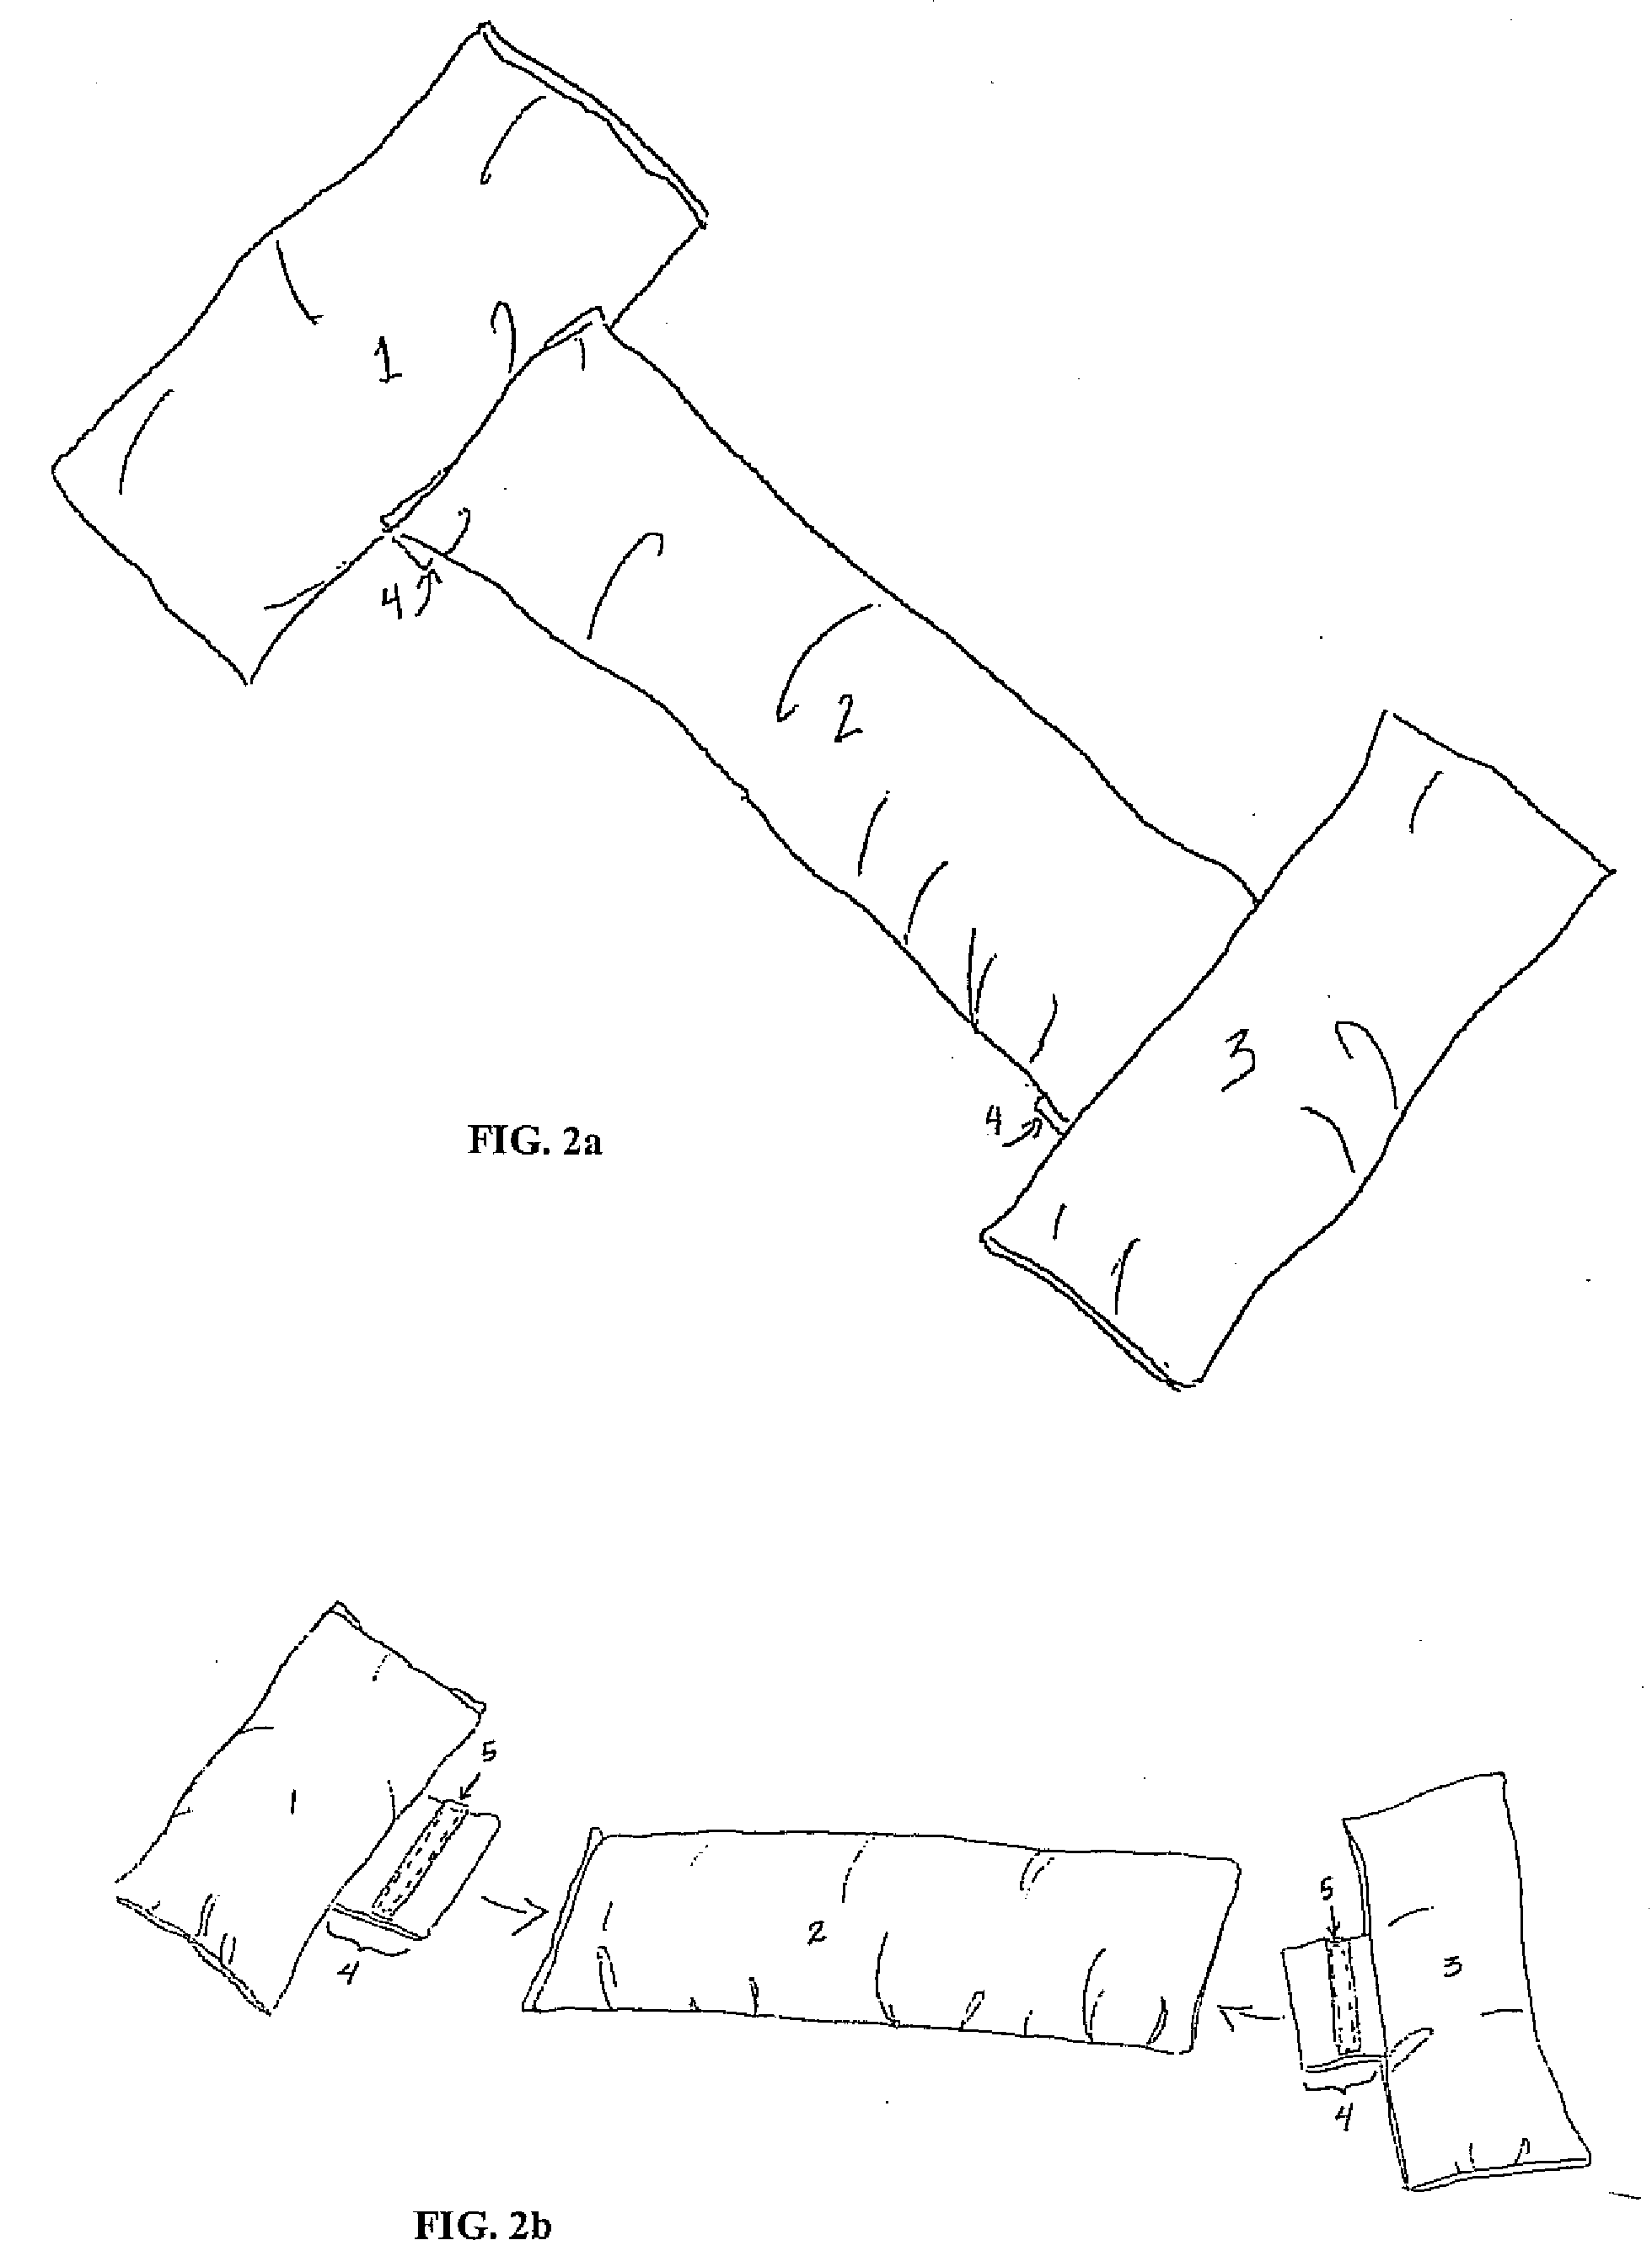 Therapeutic Neutral Spine and Exercise Device and Method of Applying Same